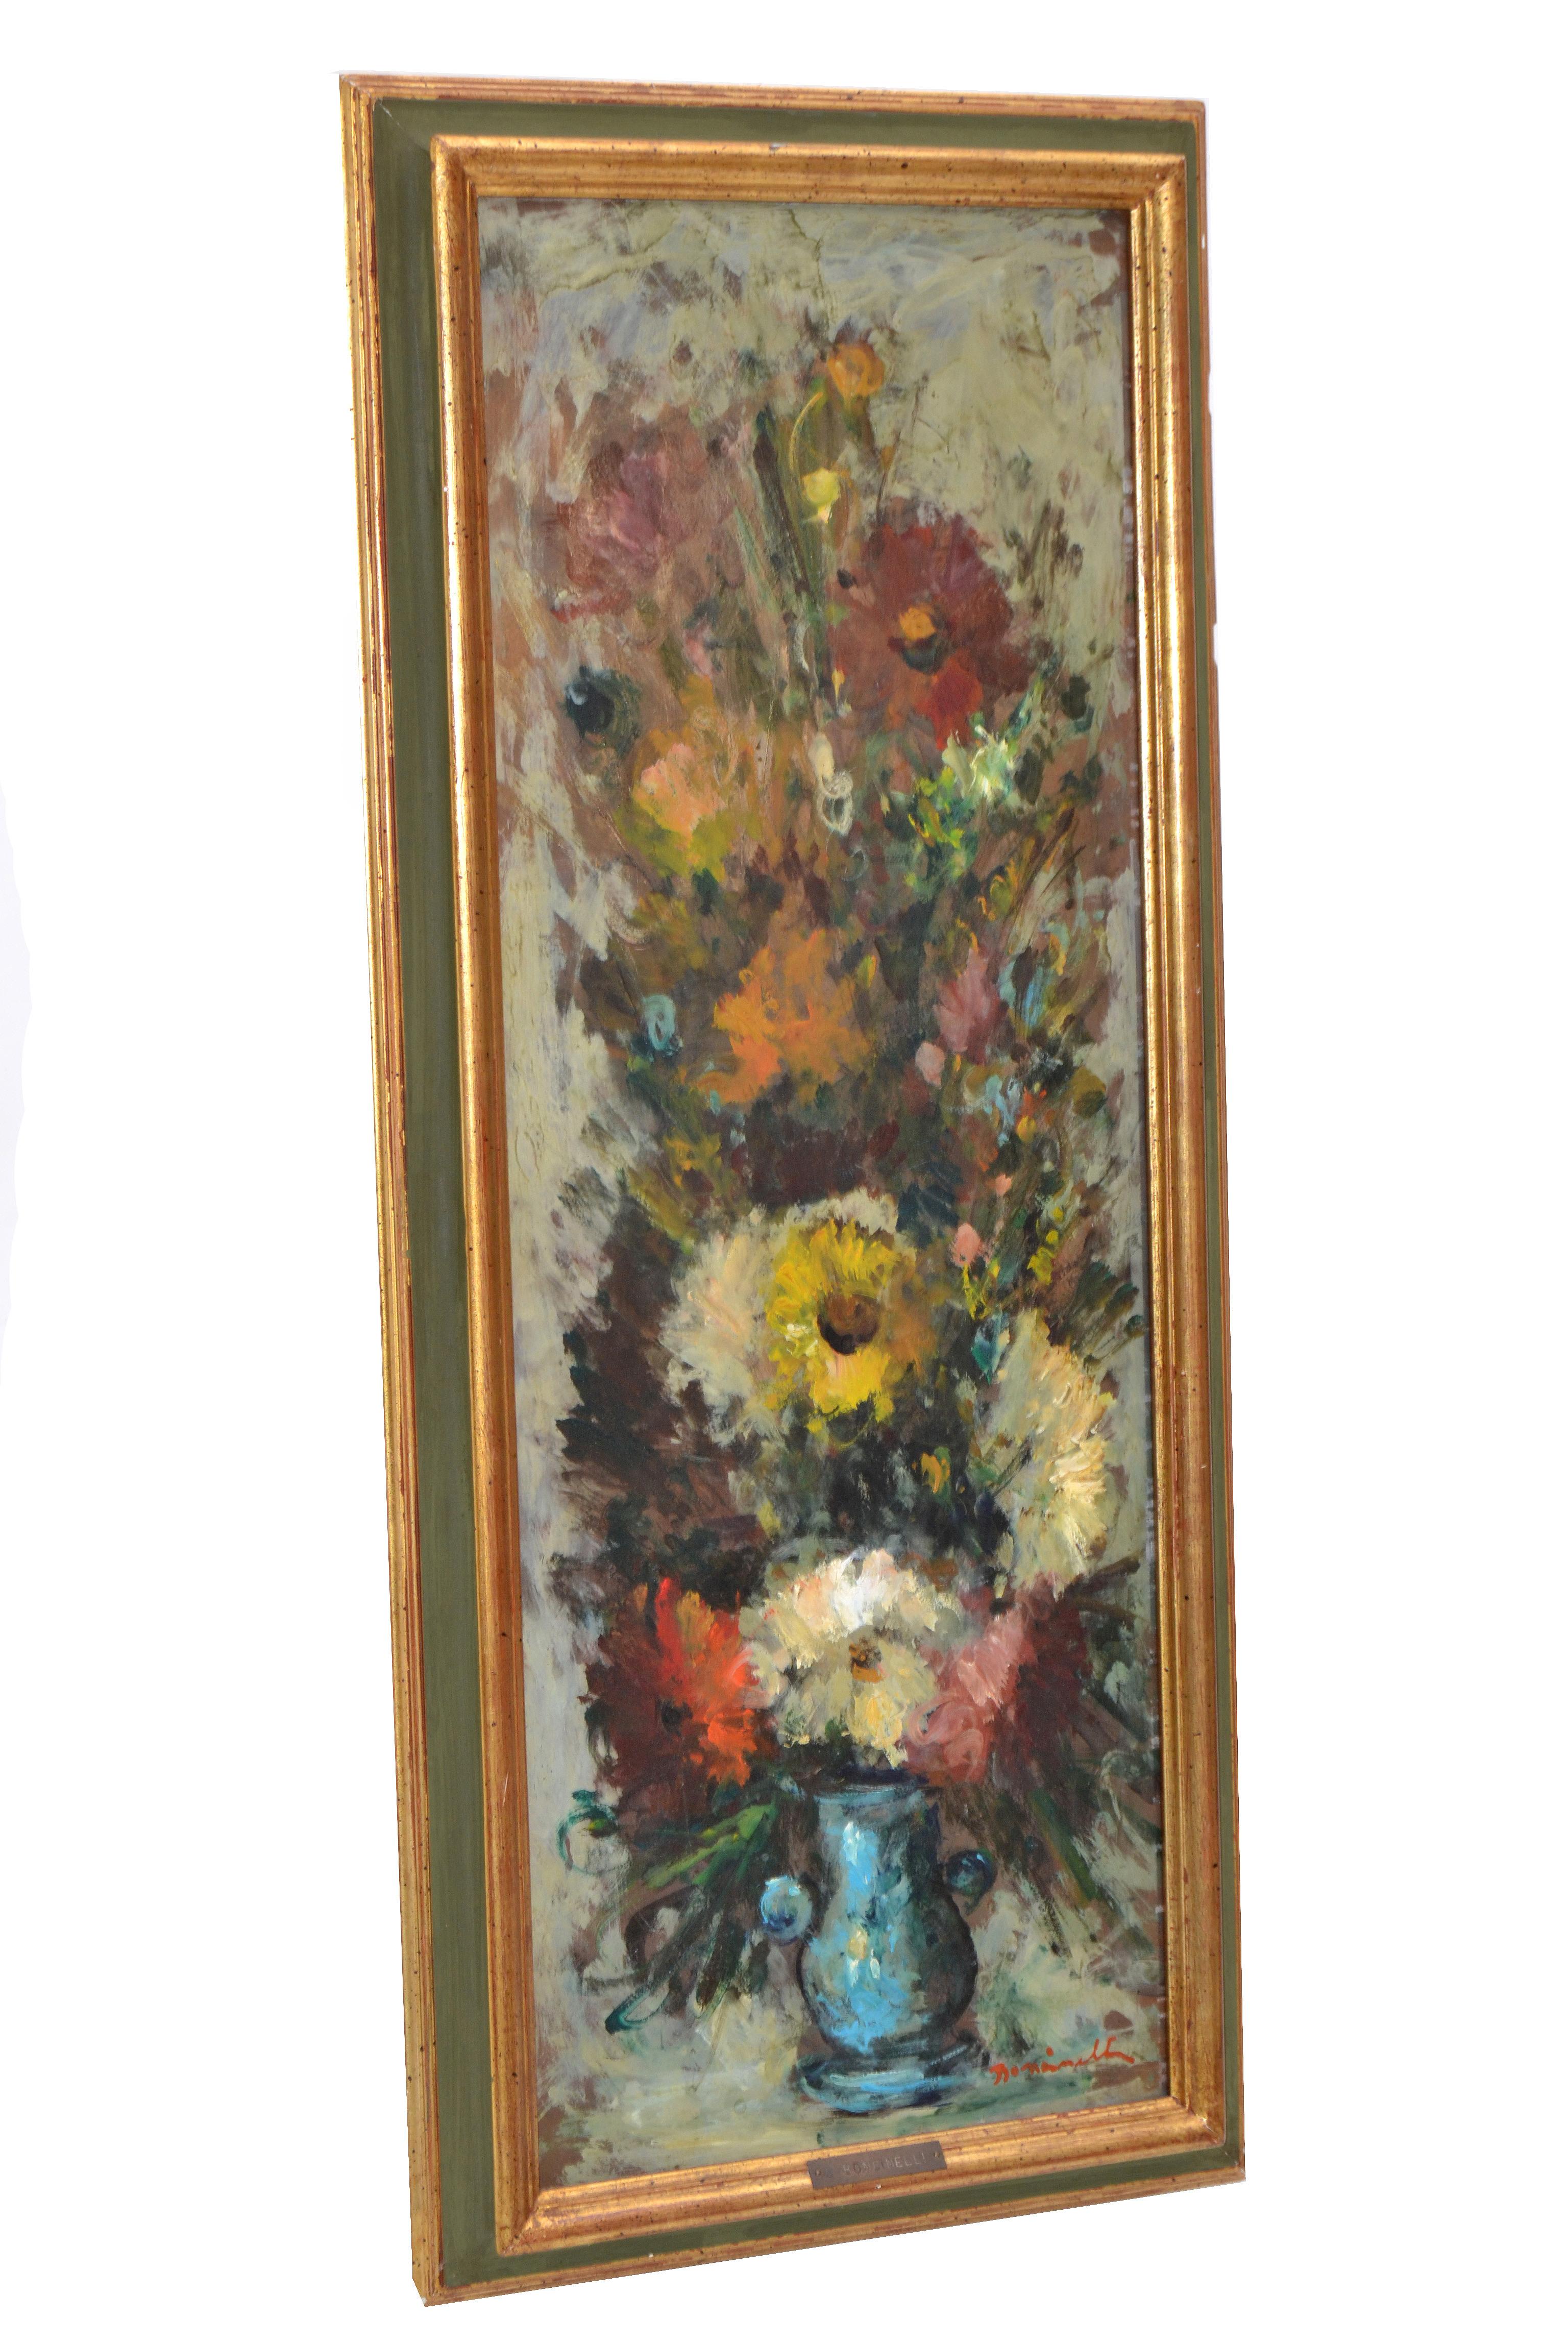 Large ornate gilt wood framed oil on board painting floral bouquet still life by Italian Artist G. Boncinelli dated 1966.
Skillfully applied textured flowers in a vase with rich deep color contrast.
Signed on front right corner and Metal Tag, G.